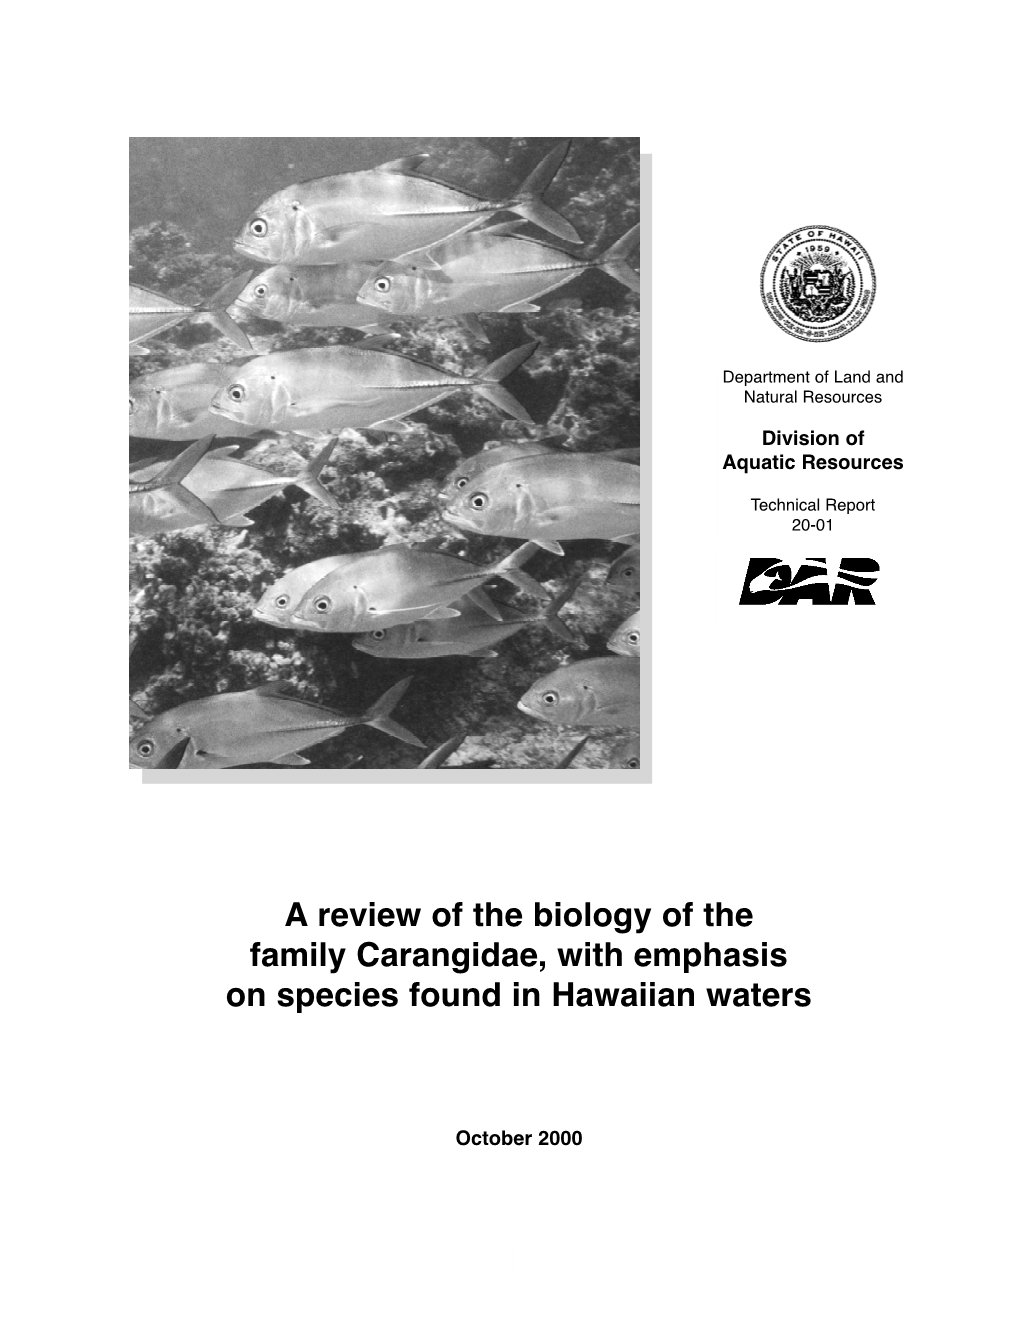 A Review of the Biology of the Family Carangidae, with Emphasis on Species Found in Hawaiian Waters